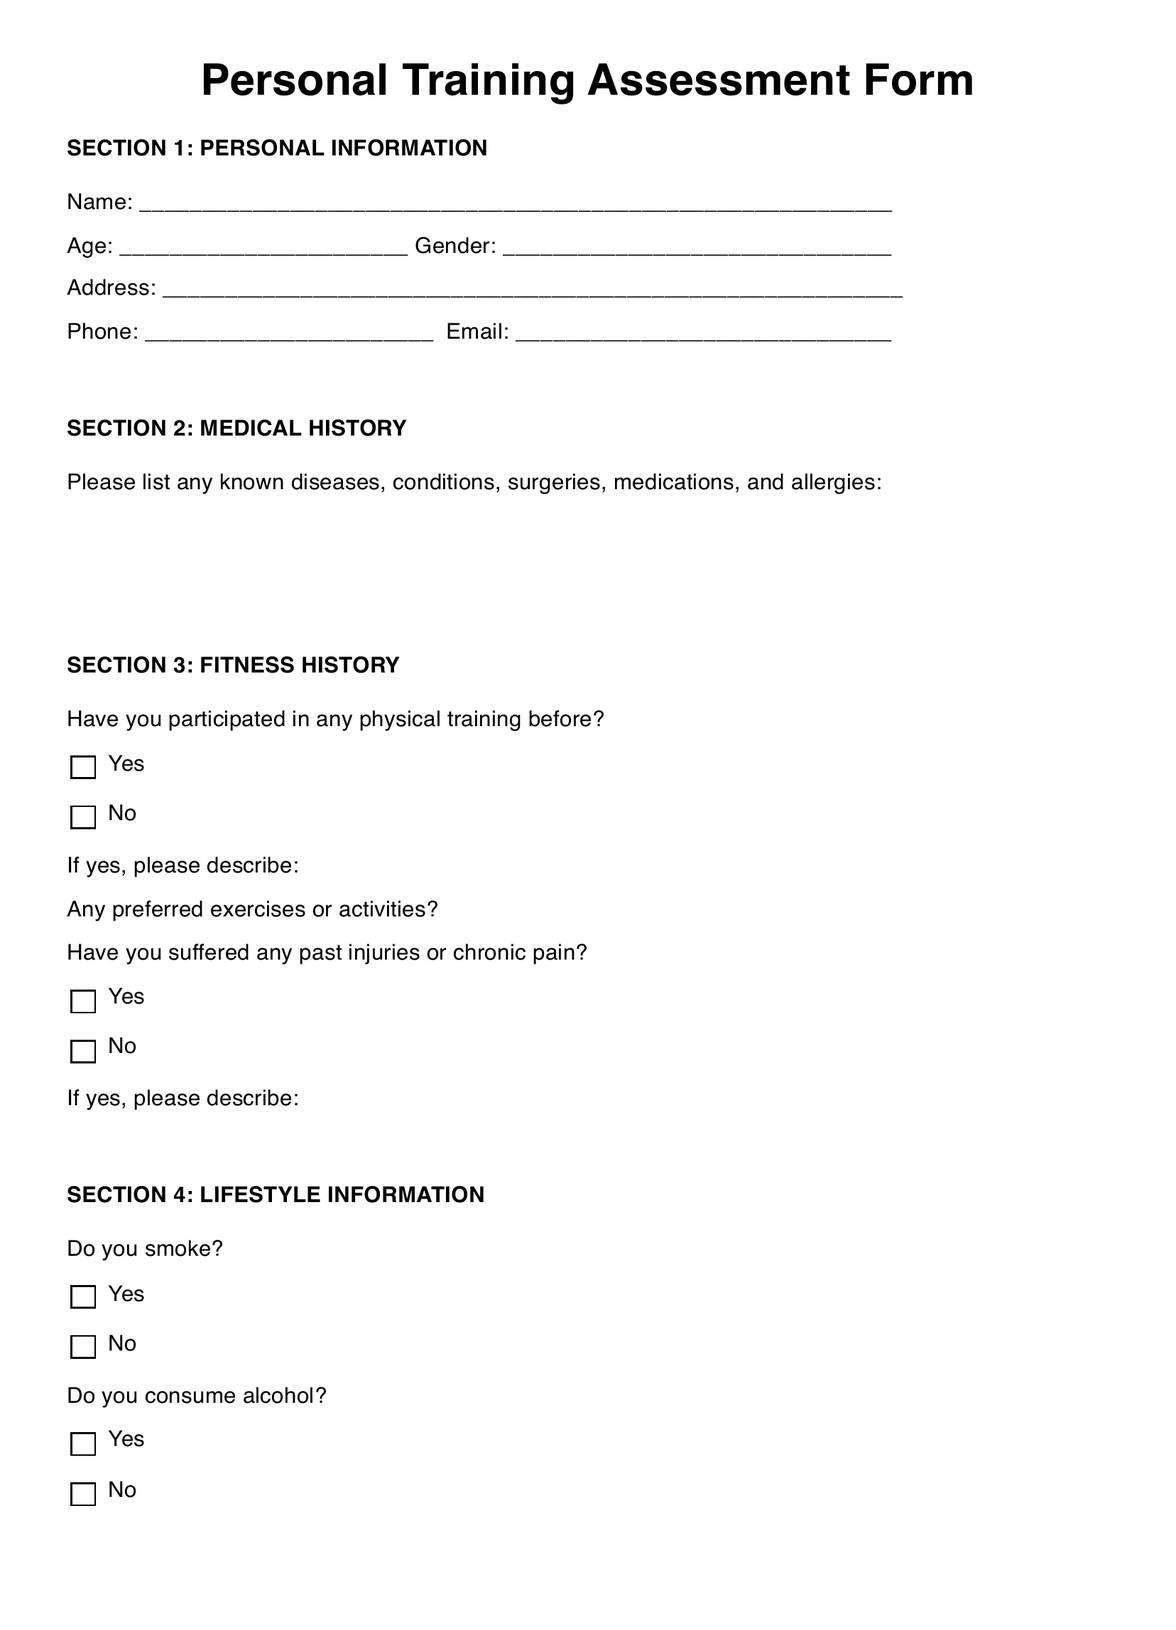 Personal Training Assessment Forms PDF Example